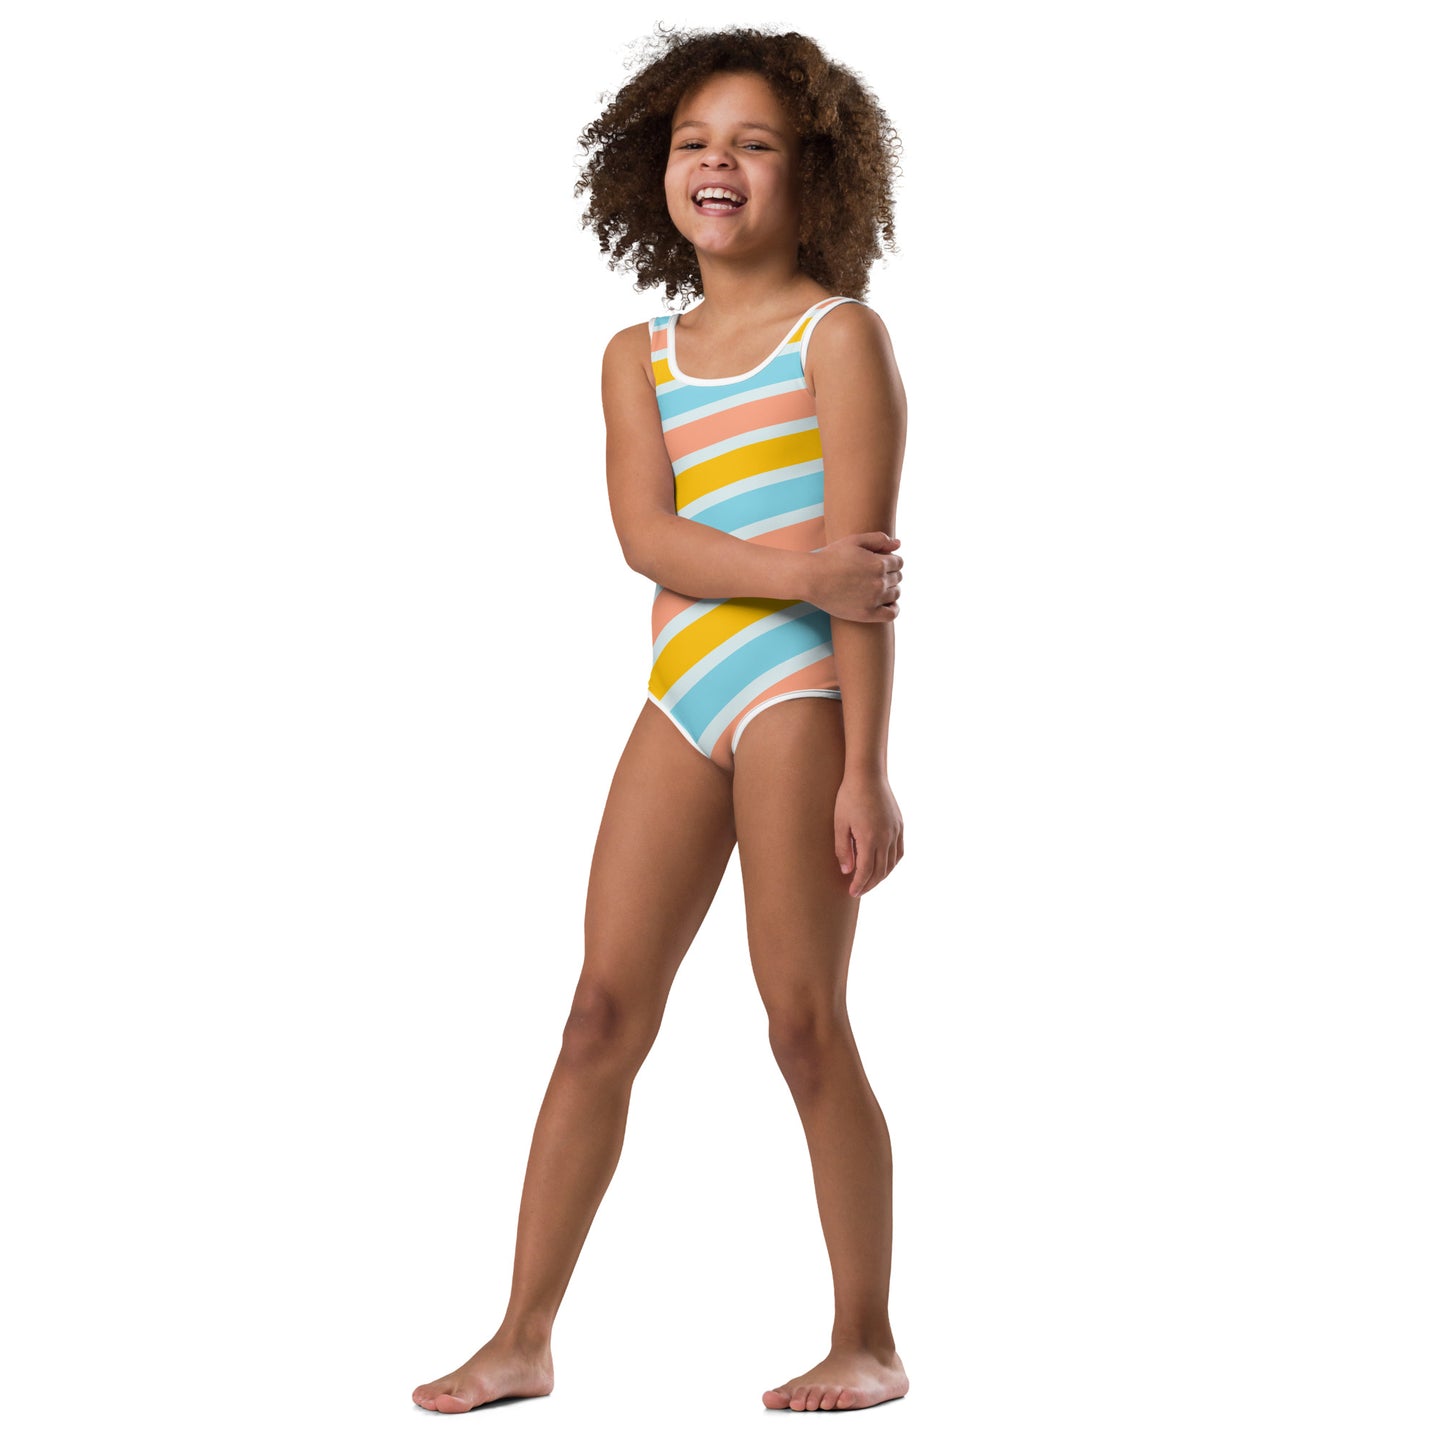 Kid with striped swimsuit in blue, orange and yellow